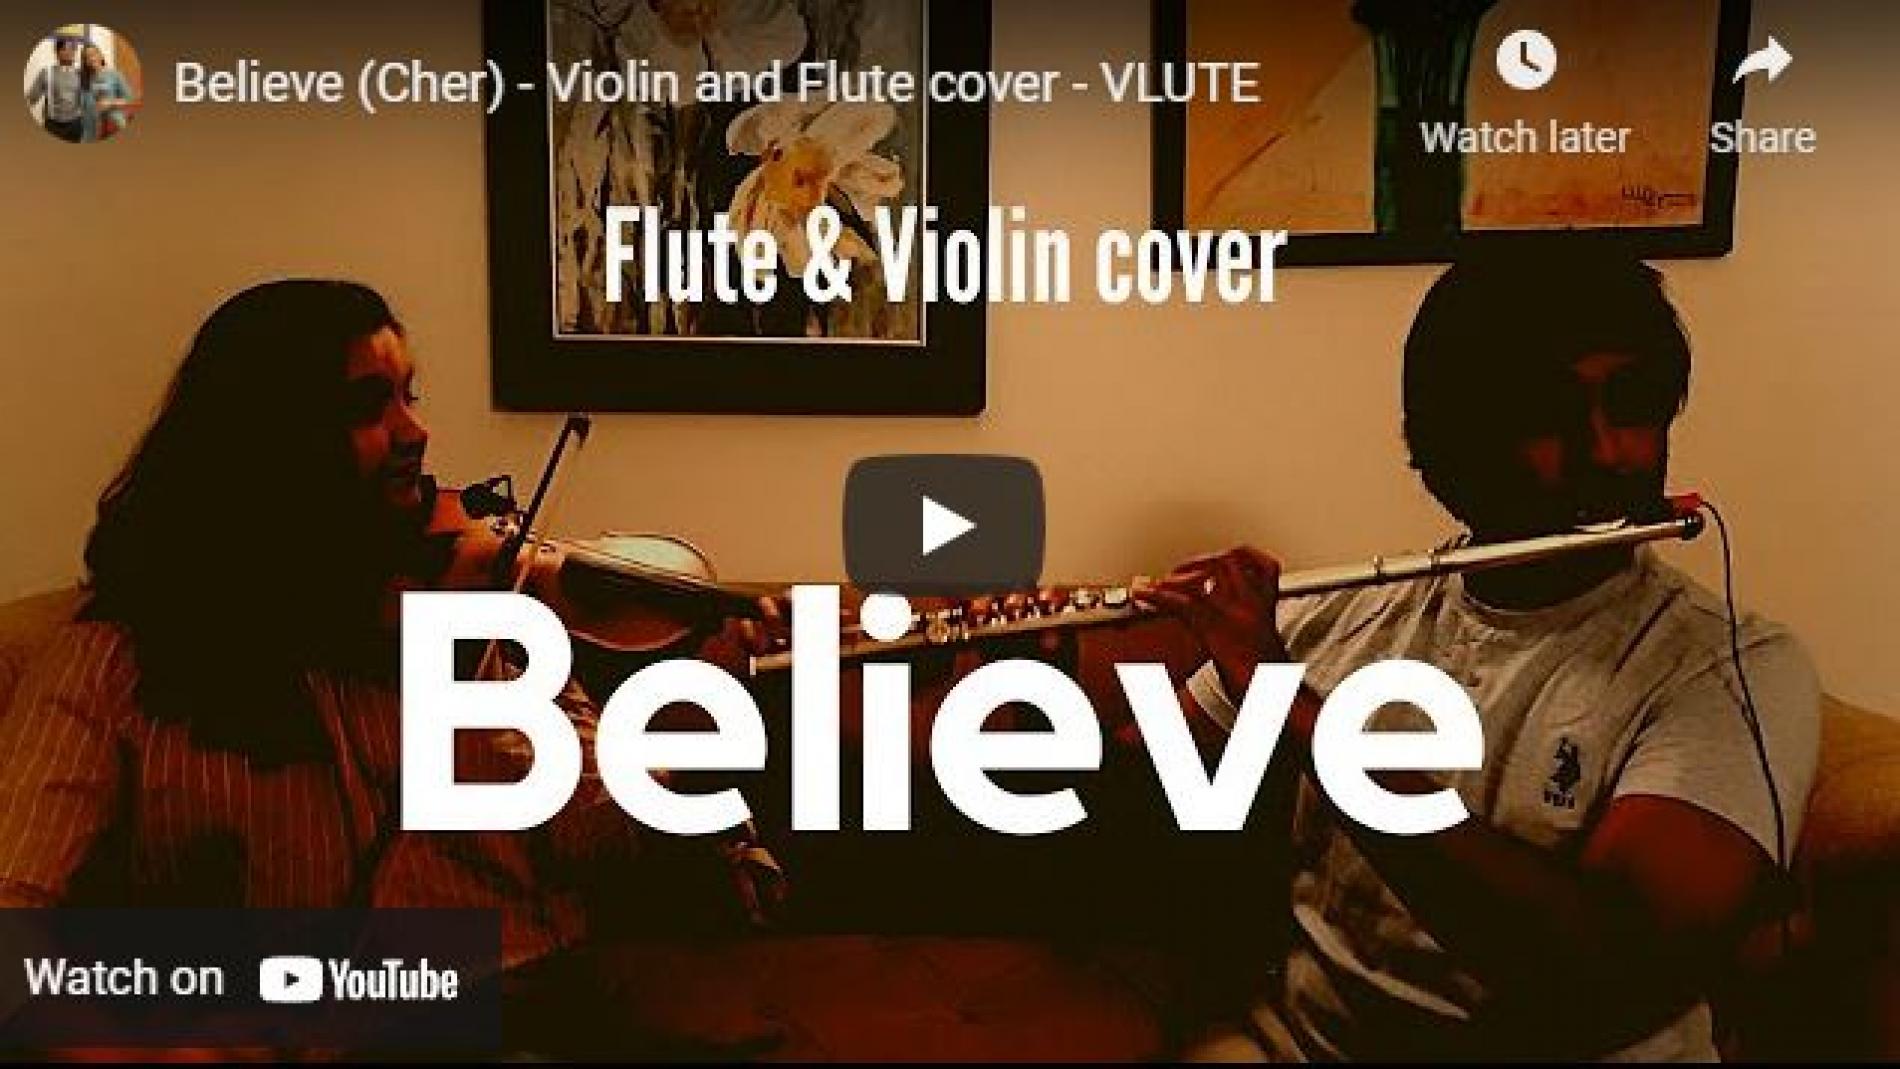 New Music : Believe (Cher) – Violin And Flute Cover – VLUTE